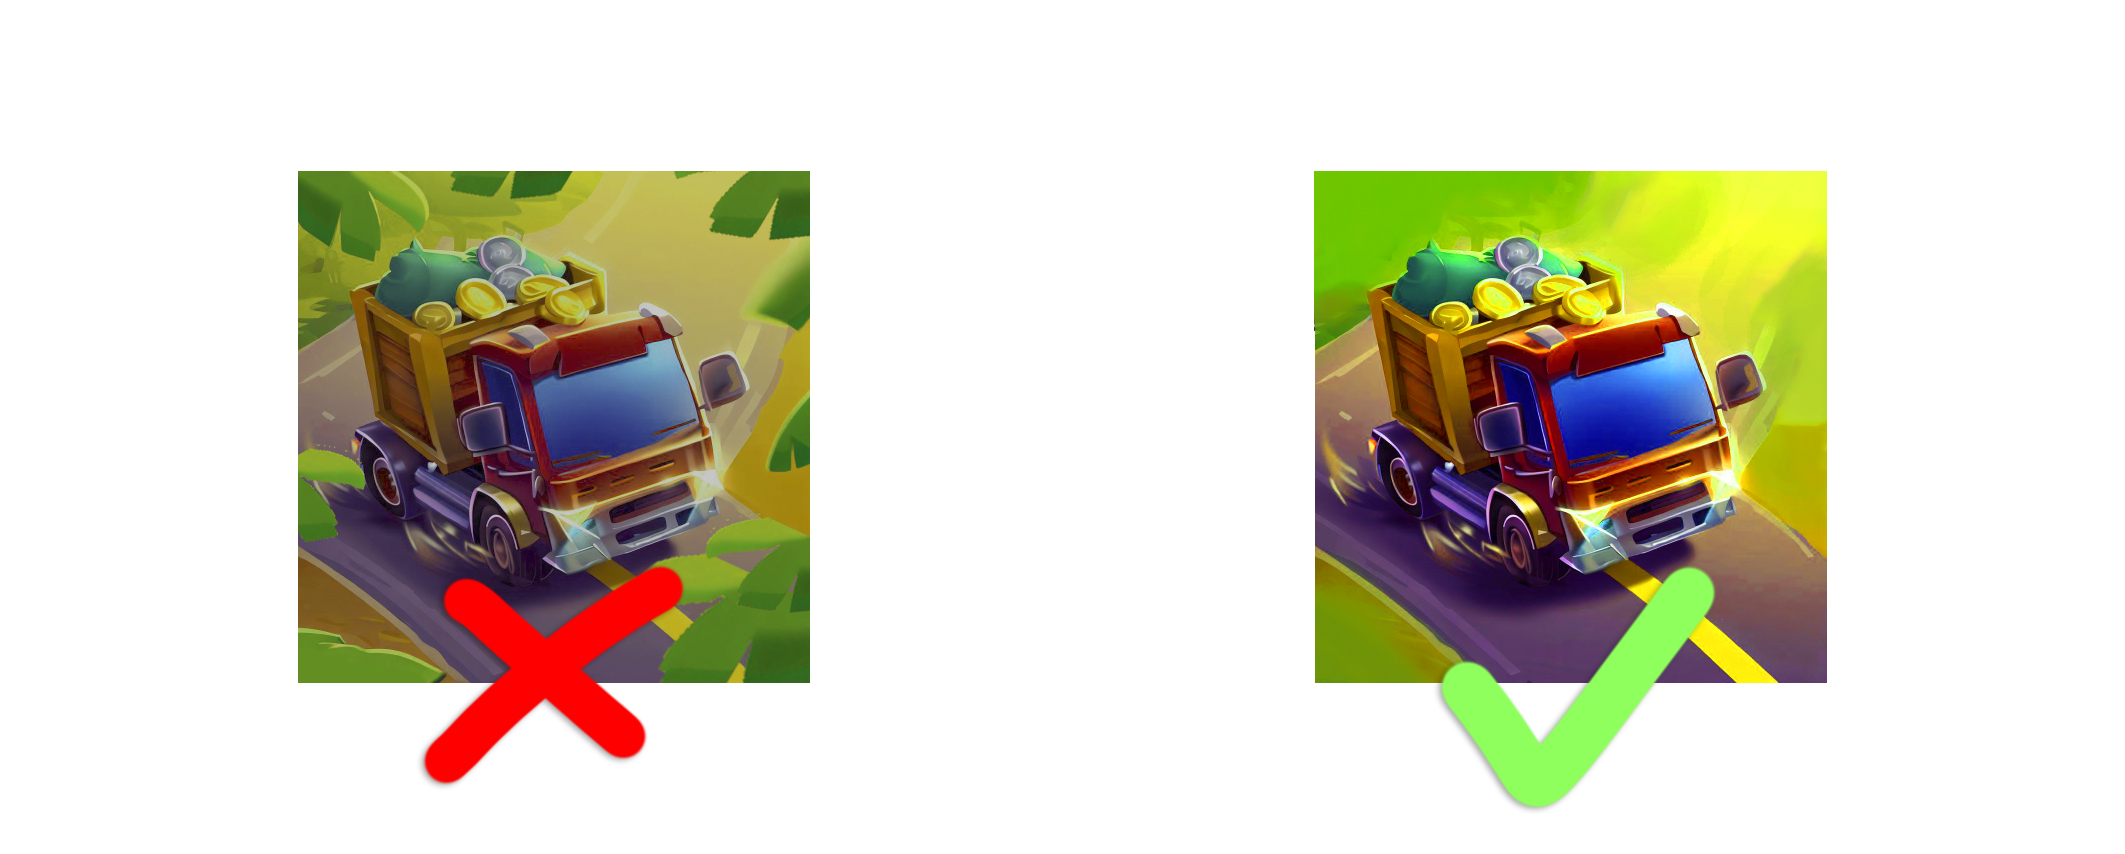 A comparaison of a bad and a good icon/thumbnail for a game.